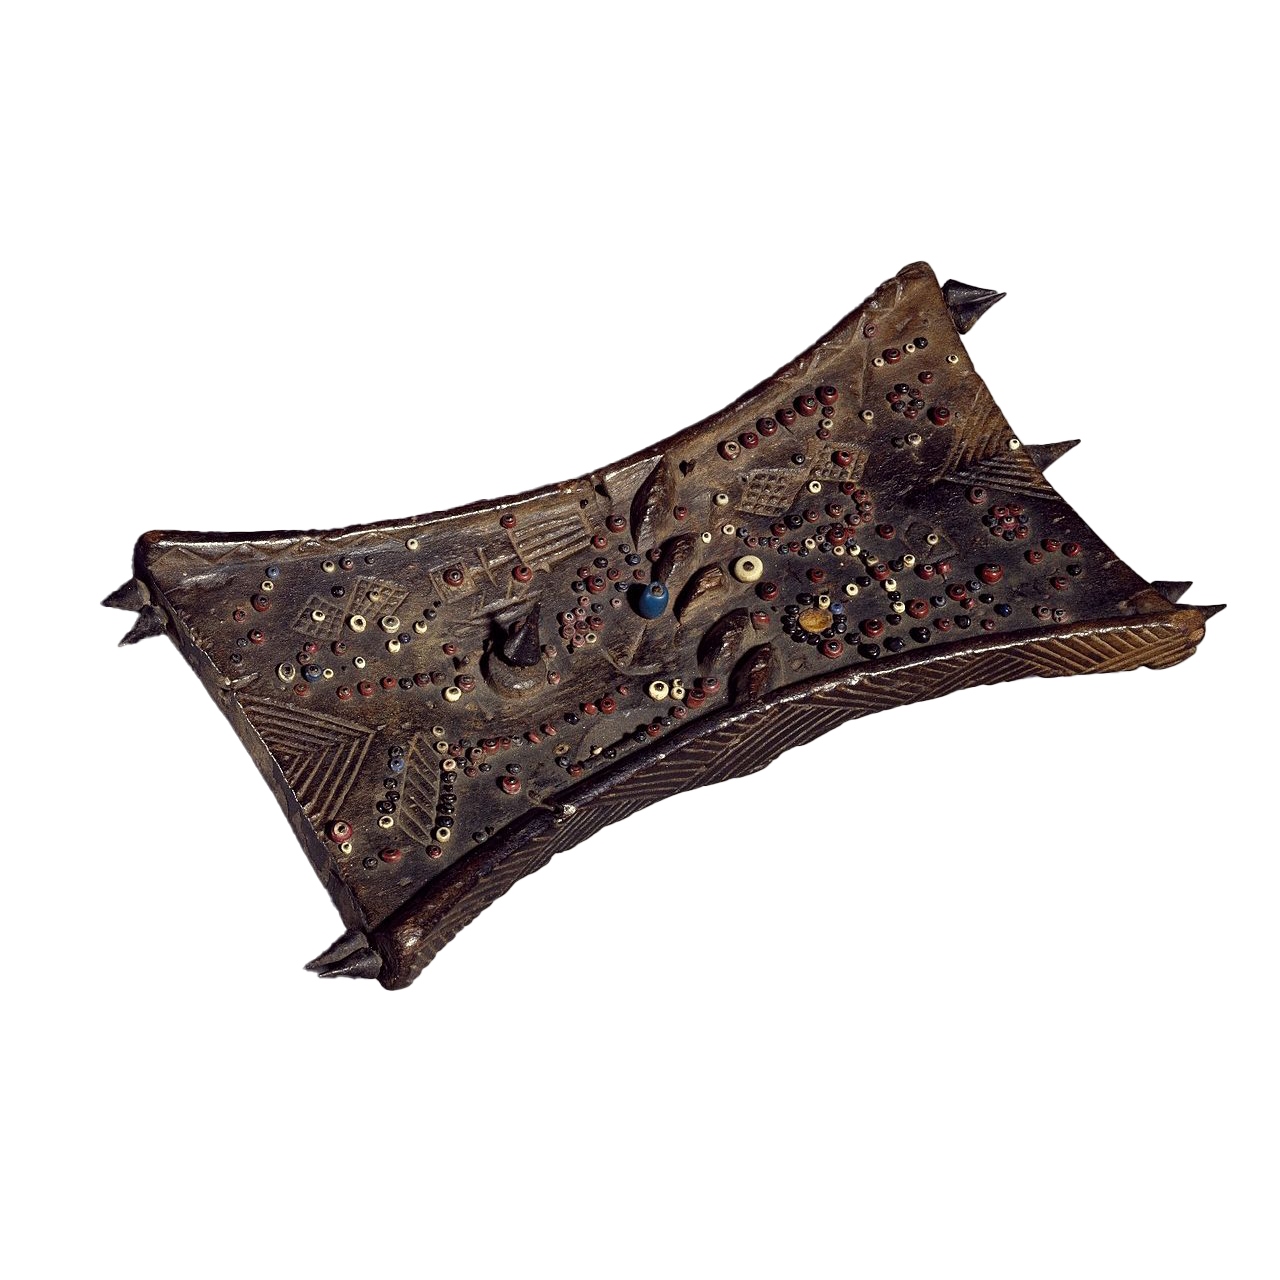 Lukasa memory board, hourglass-shaped wooden tablet covered with multicolored beads and carved symbols